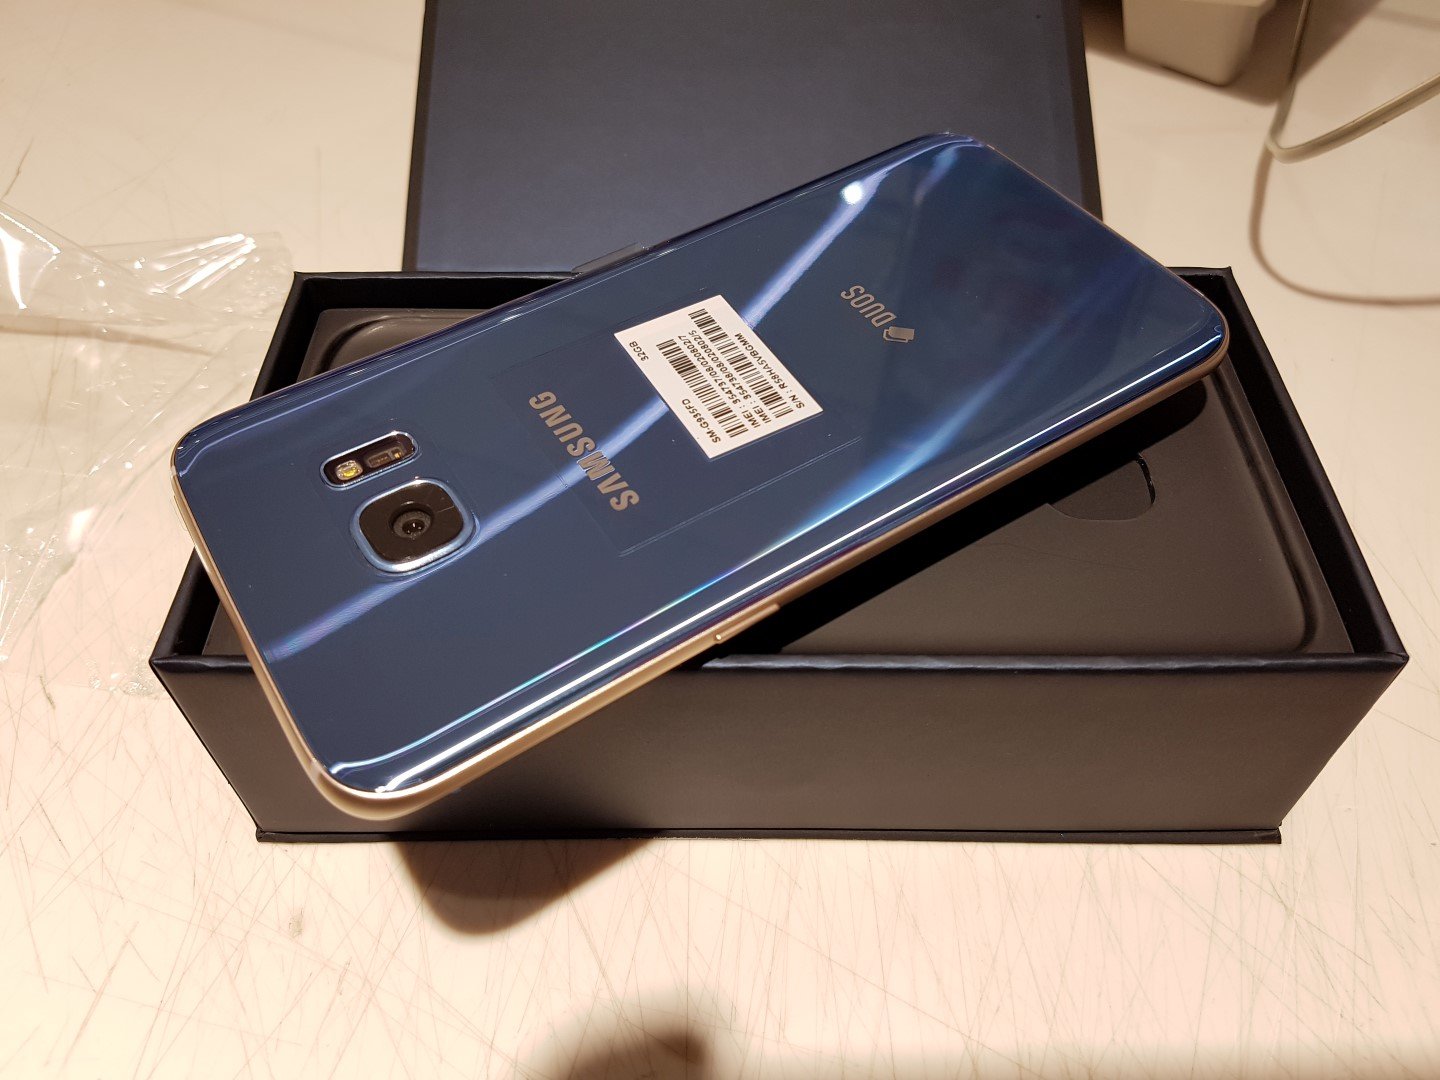 Check out these pictures of the Blue Coral Galaxy S7 edge ... - 1440 x 1080 jpeg 203kB